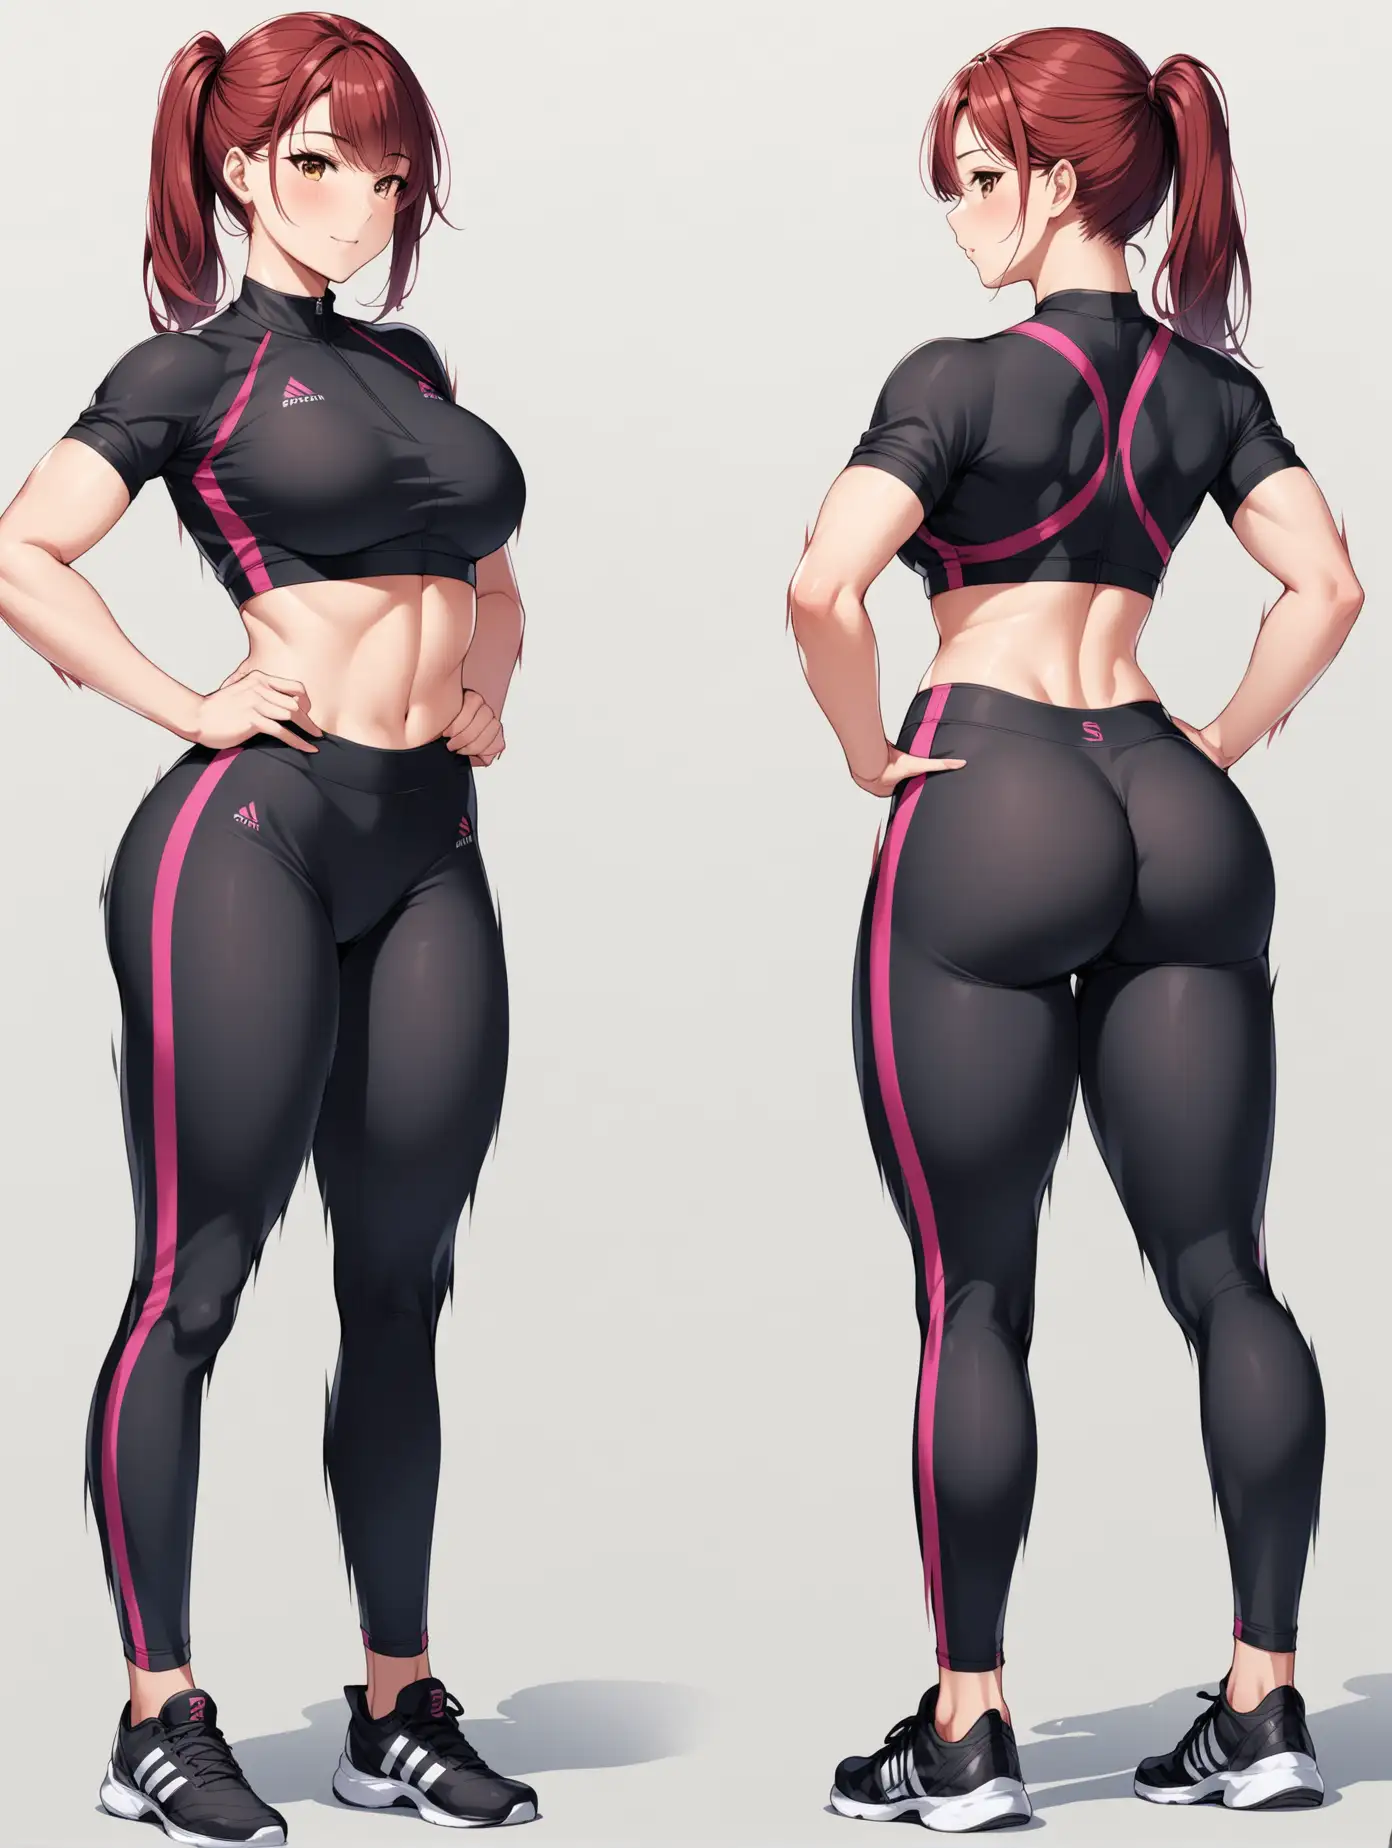 Young-Woman-in-Athletic-Wear-Training-with-Emphasis-on-Her-Curves